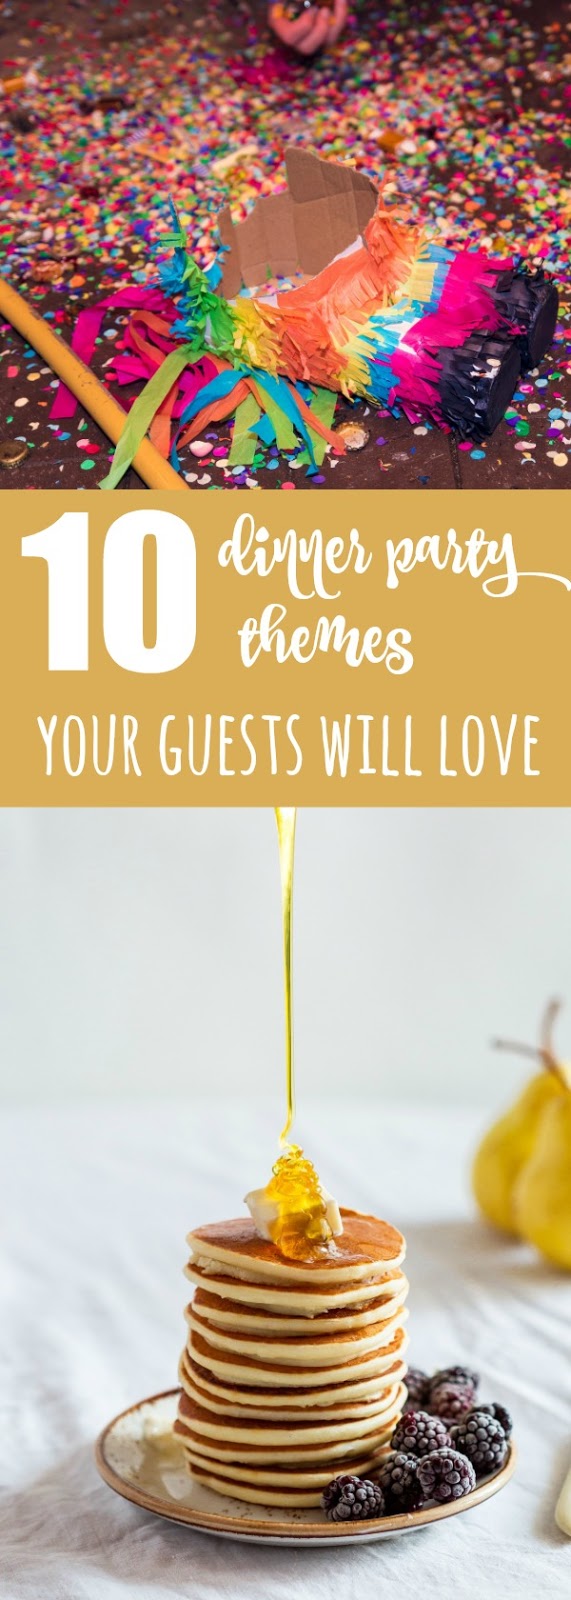 The Crazy Kitchen: 10 Dinner Party Themes your Guests will ...